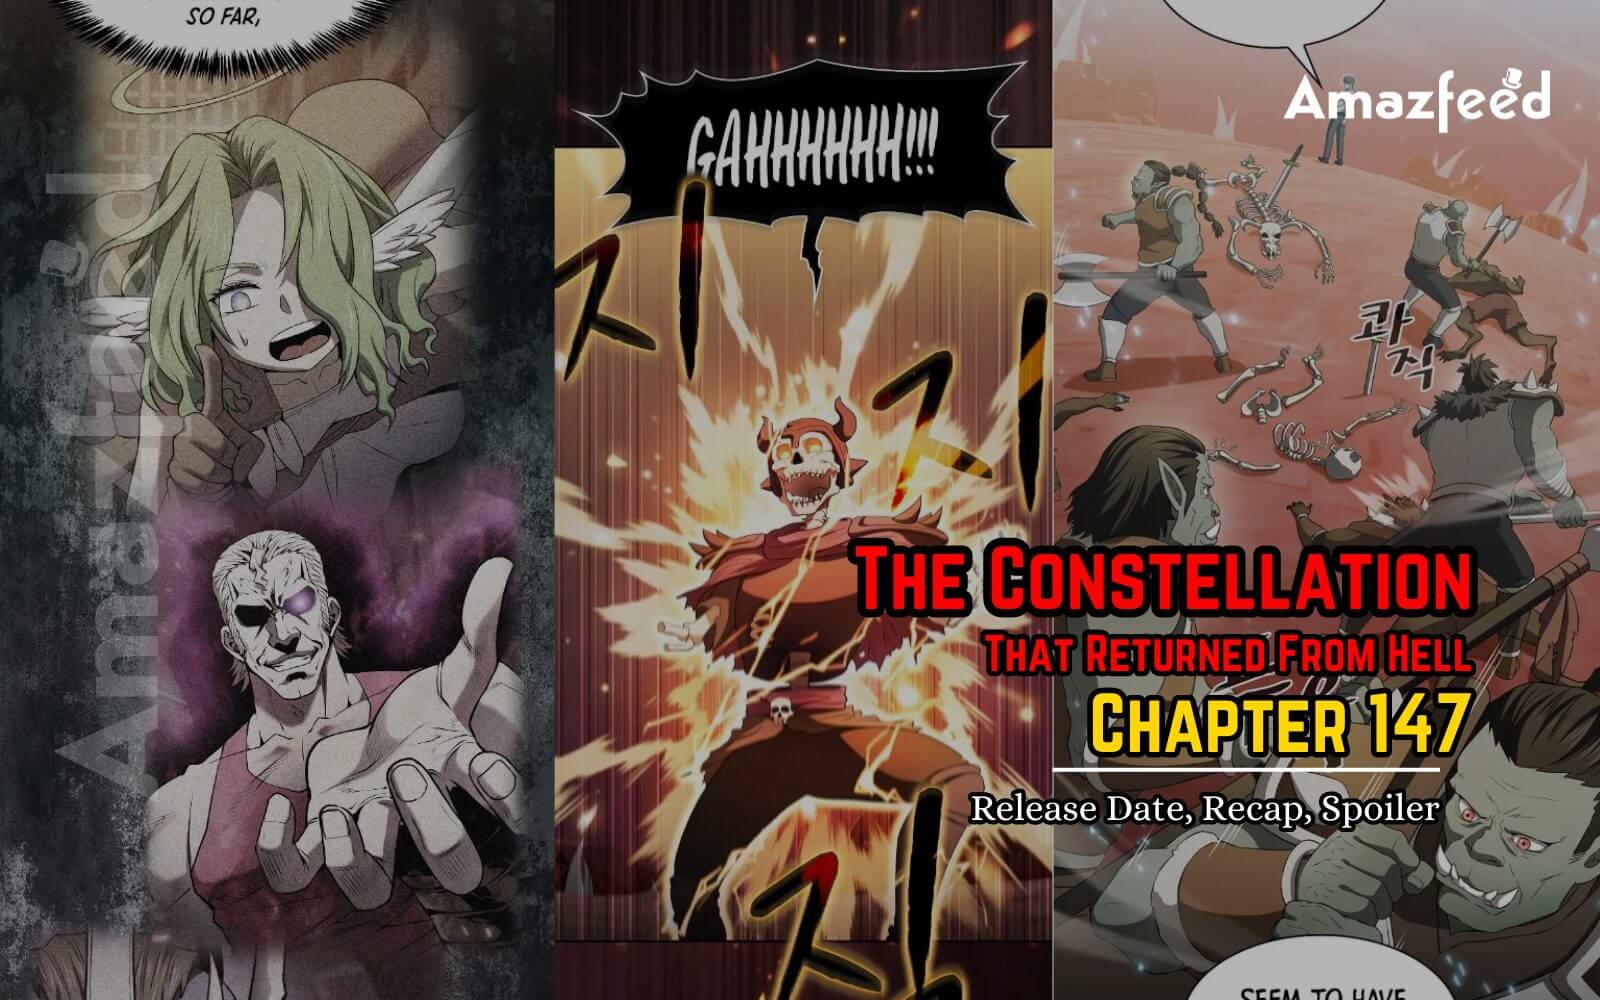 The Constellation That Returned From Hell Chapter 147 Release Date